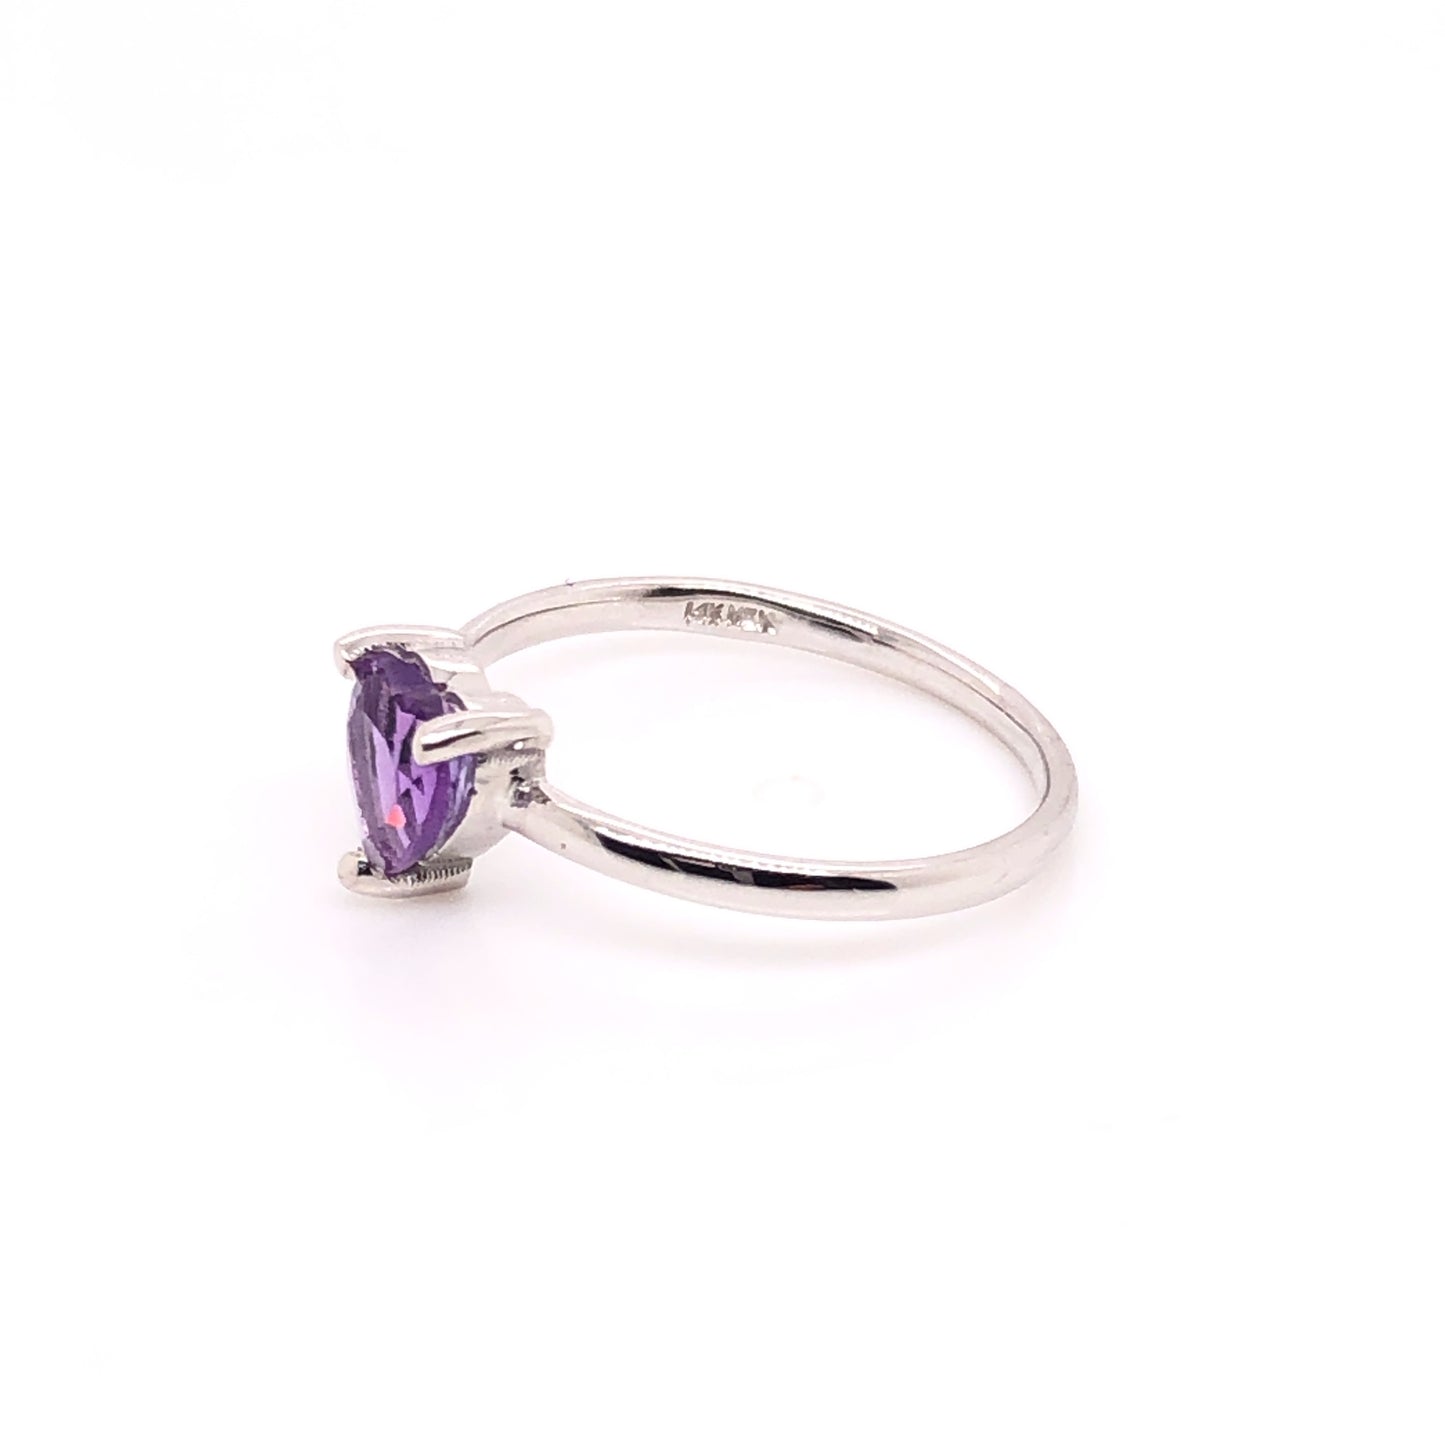 Amethyst ring in the shape of a small heart